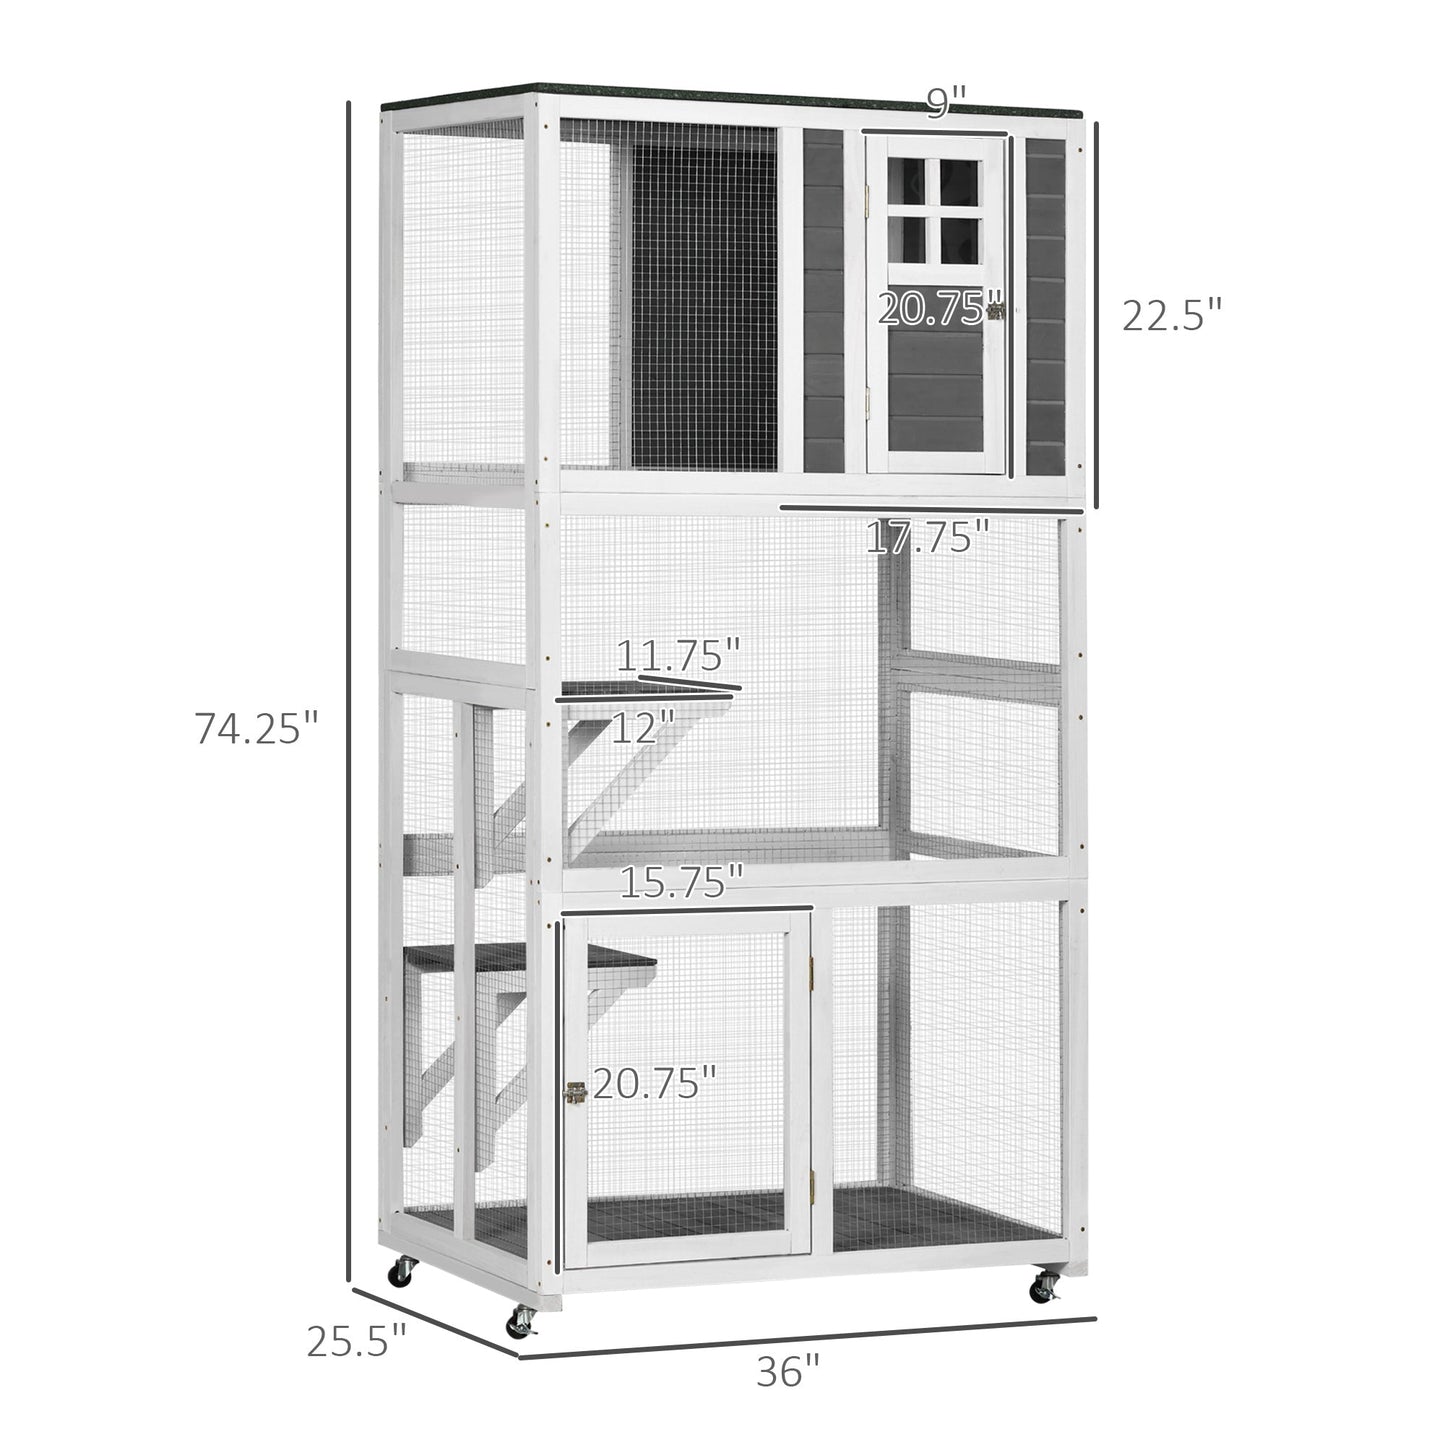 -PawHut Outdoor Cat House, Wooden Catio on Wheels, Large Kitten Playpen with Weather Protection Roof, 2 Platforms, Resting Condo, Enter Door 36"L - Outdoor Style Company